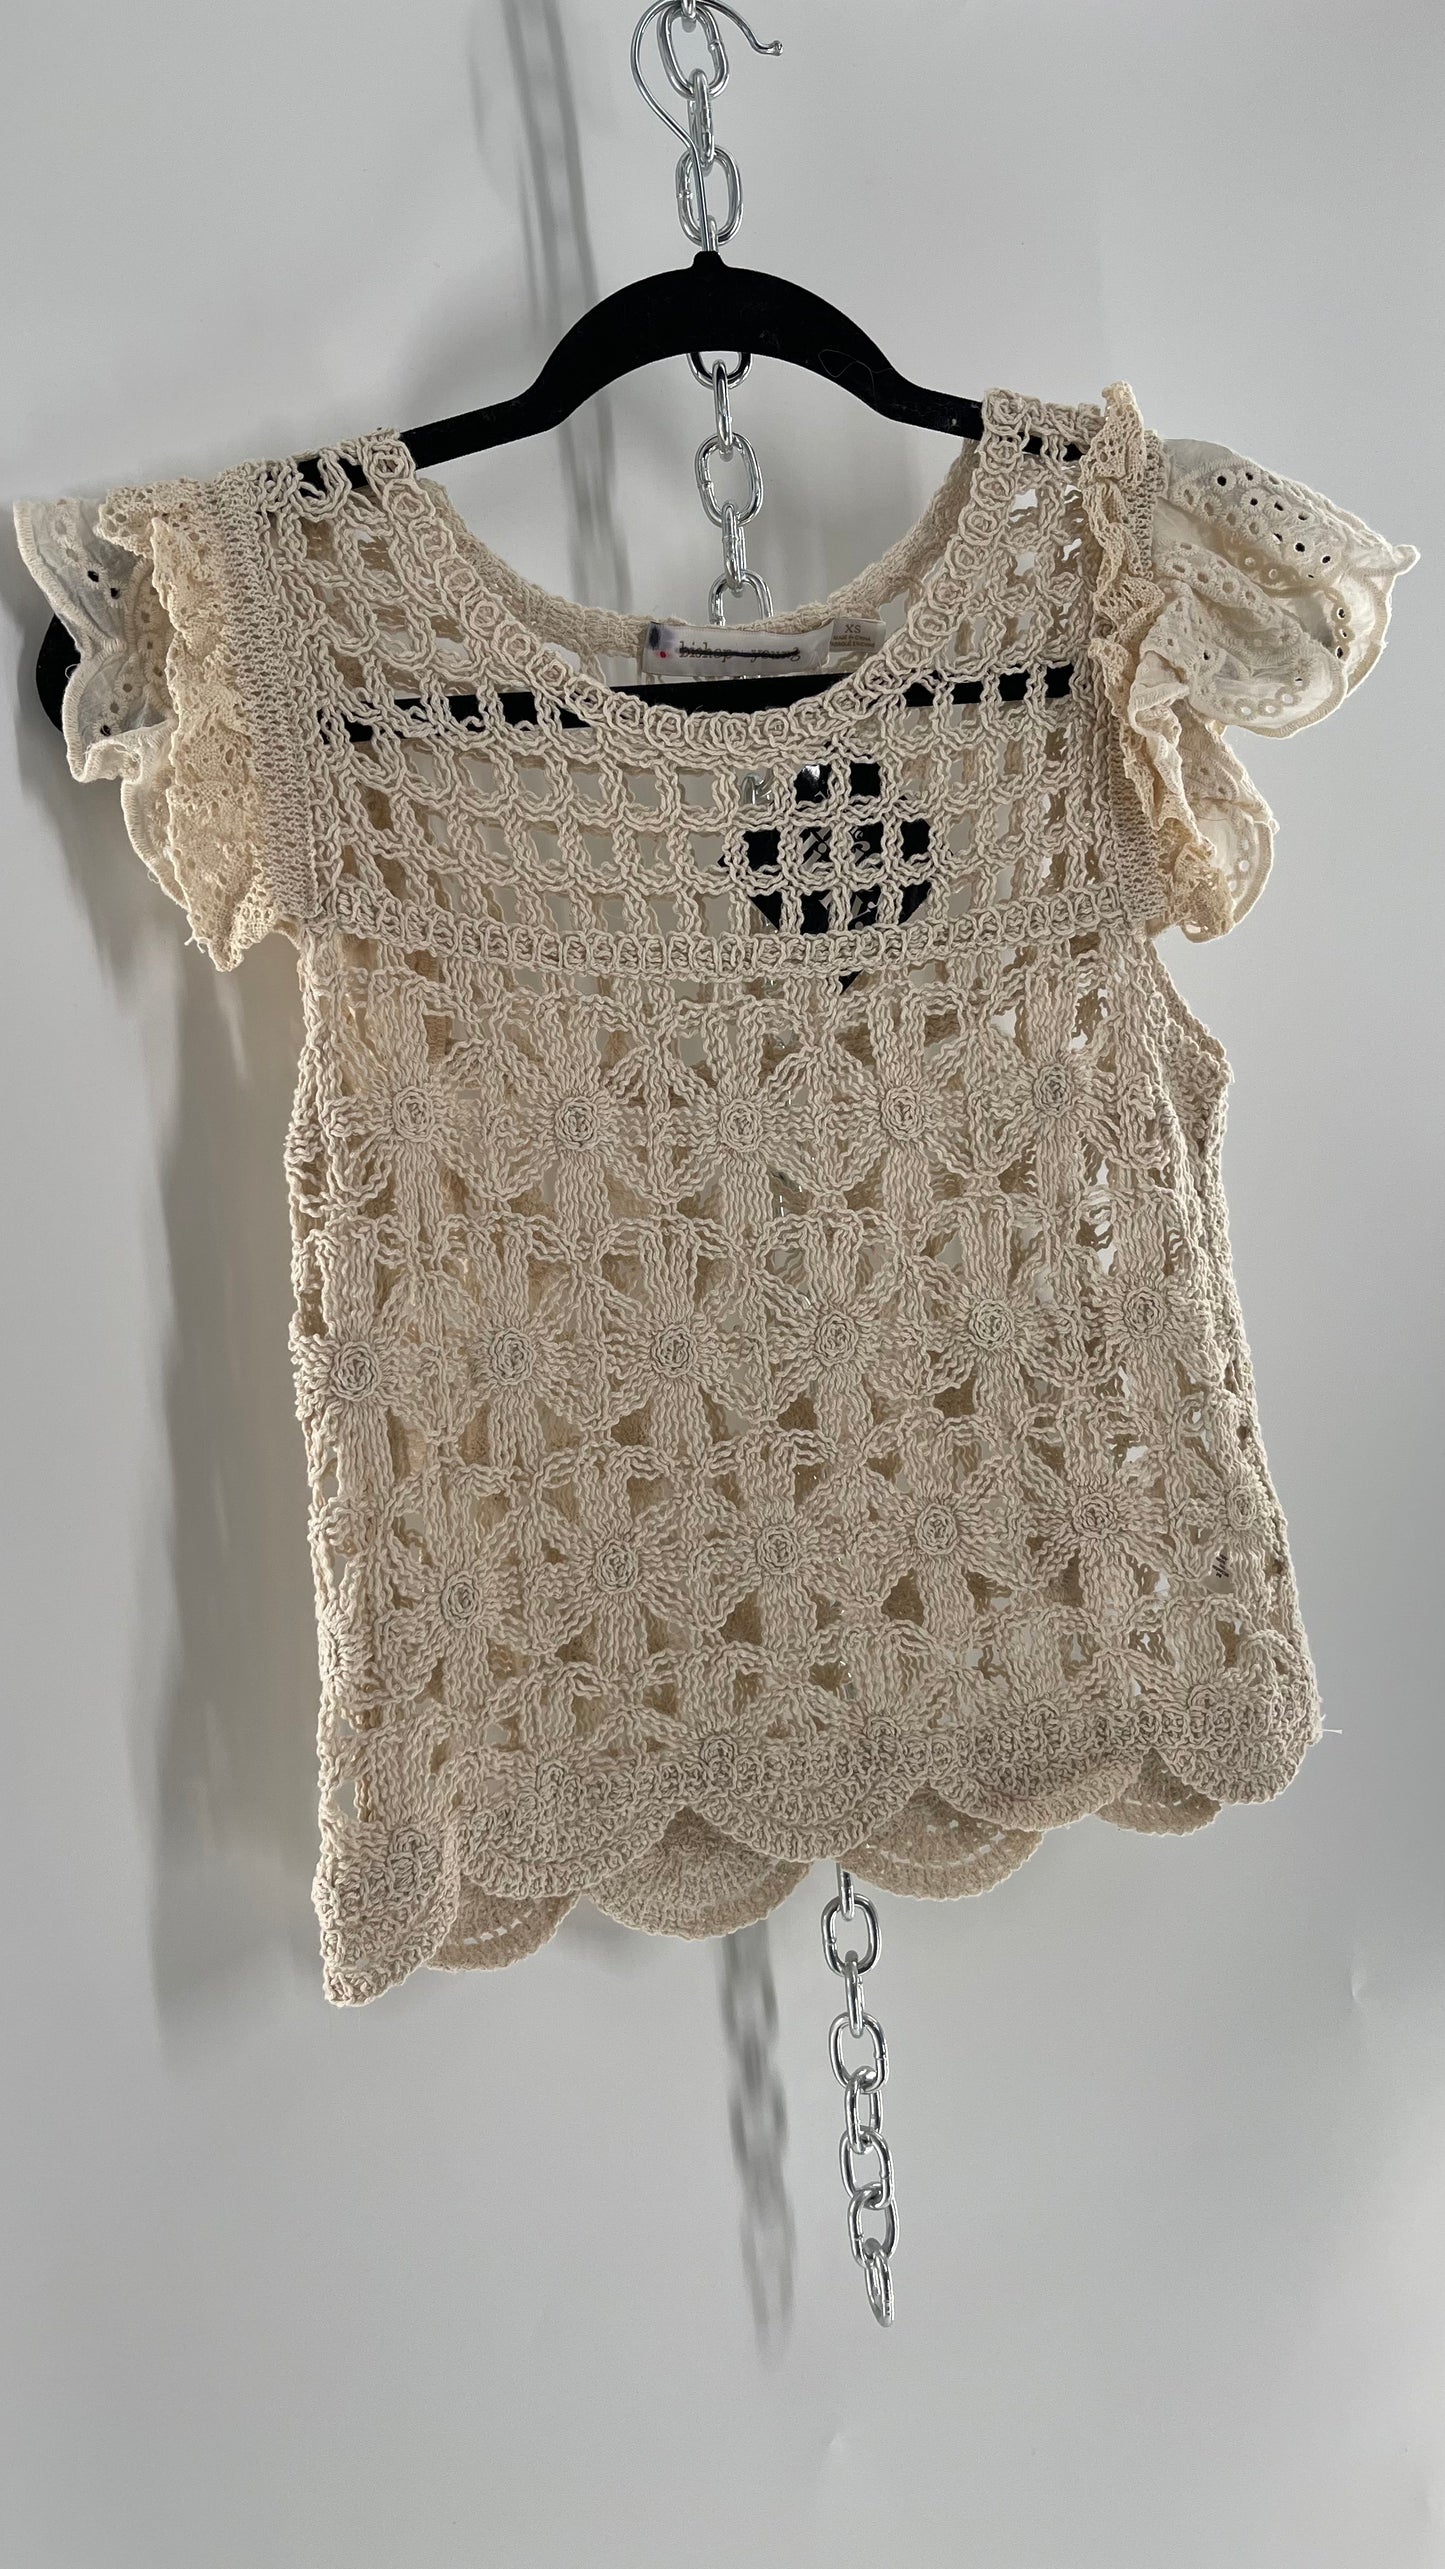 Bishop + Young Anthropologie Crochet Tank with Scalloped Hem and Lace Lined Sleeves (Small)